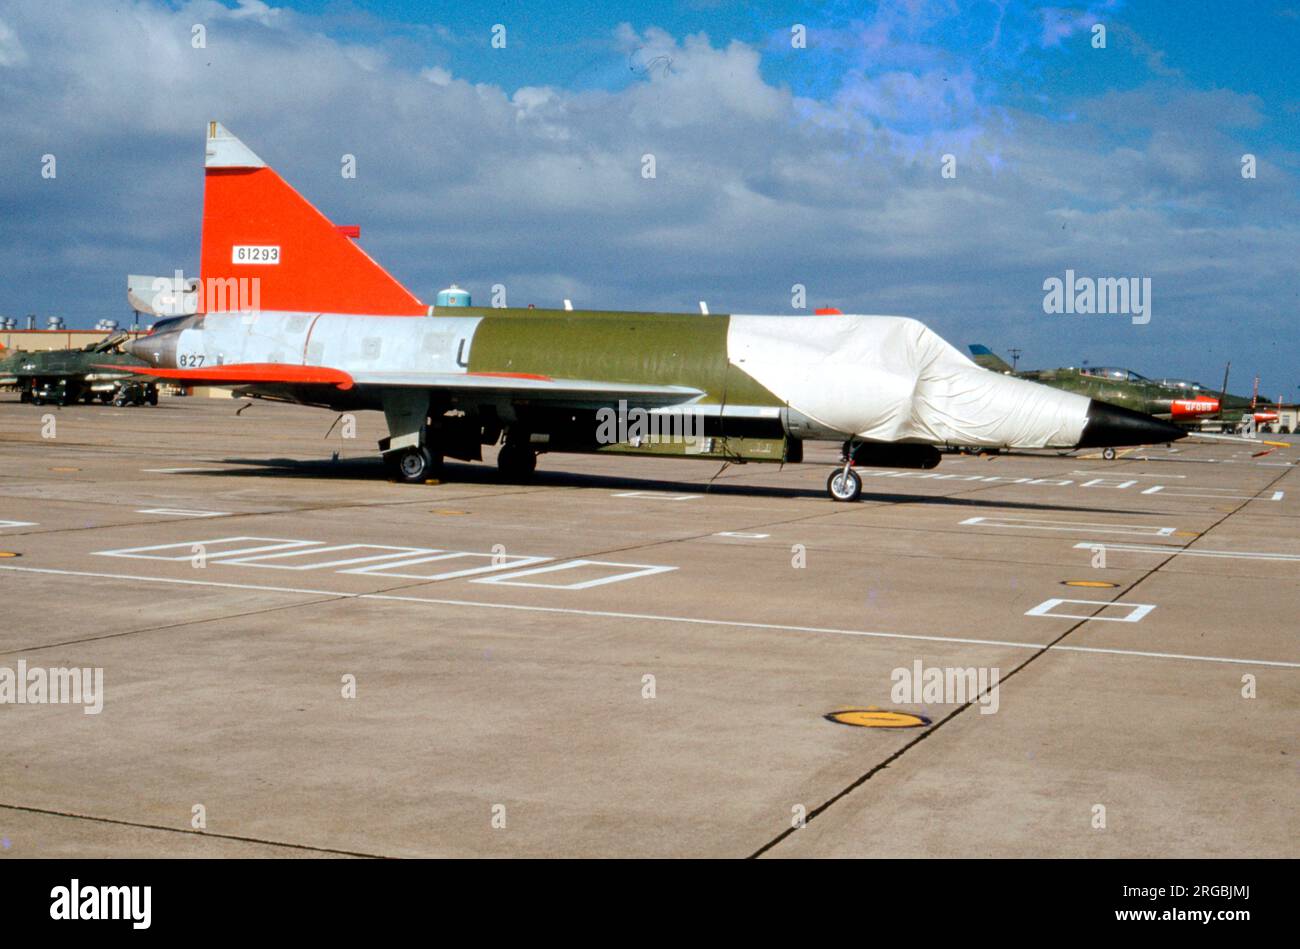 United States Air Force (USAF) - Convair PQM-102B Delta Dagger 827 / 56-1293 (msn 8-24-03). This aircraft was built as an F-102A-70-CO and converted to a PQM-102B target drone. Stock Photo